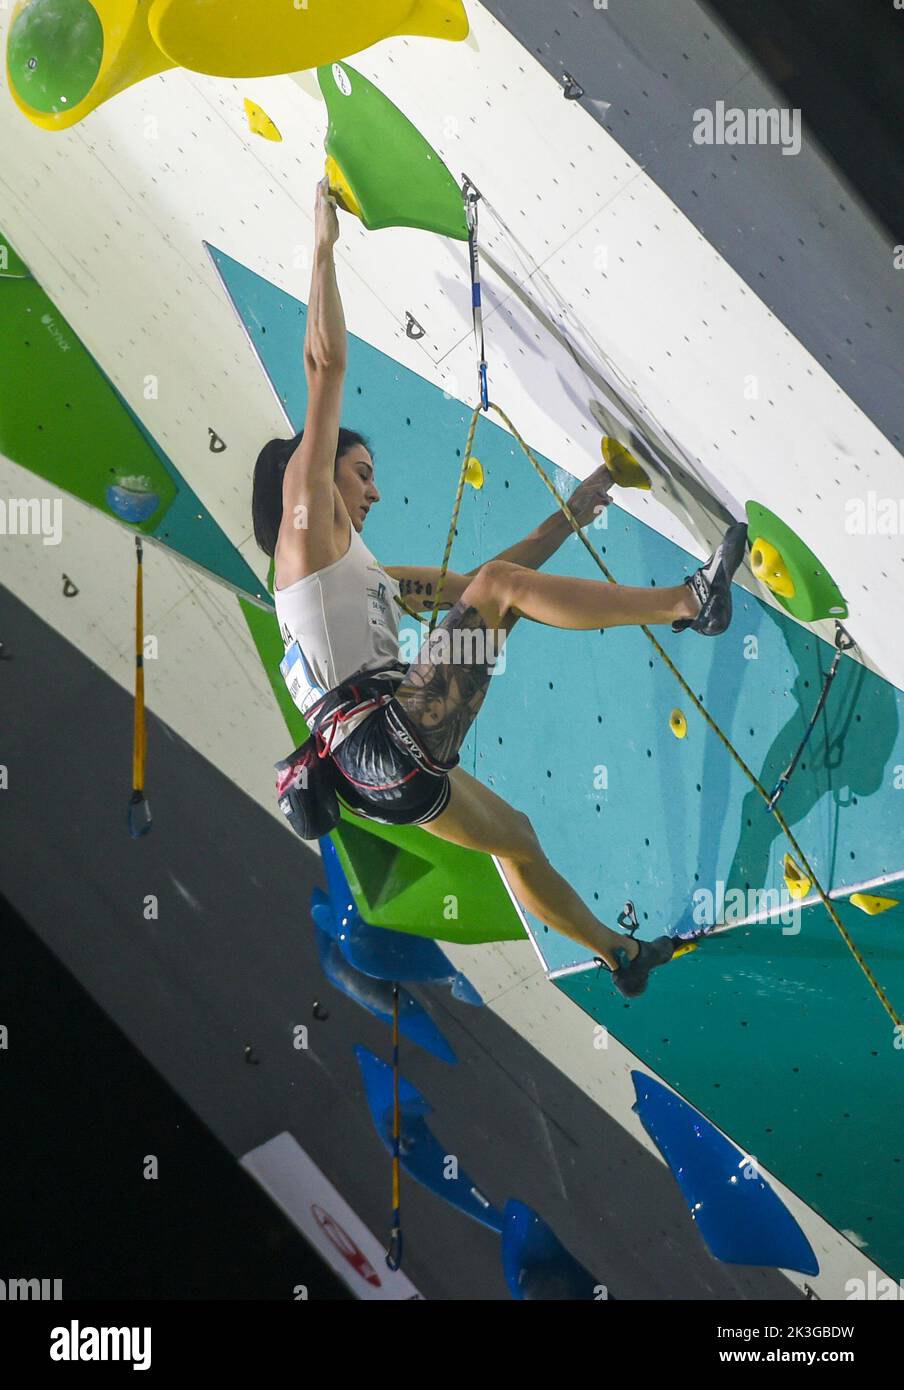 Jakarta, Indonesia. 26th Sep, 2022. Mia Krampl of Slovenia competes during the women's lead final of IFSC Climbing World Cup 2022 in Jakarta, Indonesia, Sept. 26, 2022. Credit: Zulkarnain/Xinhua/Alamy Live News Stock Photo